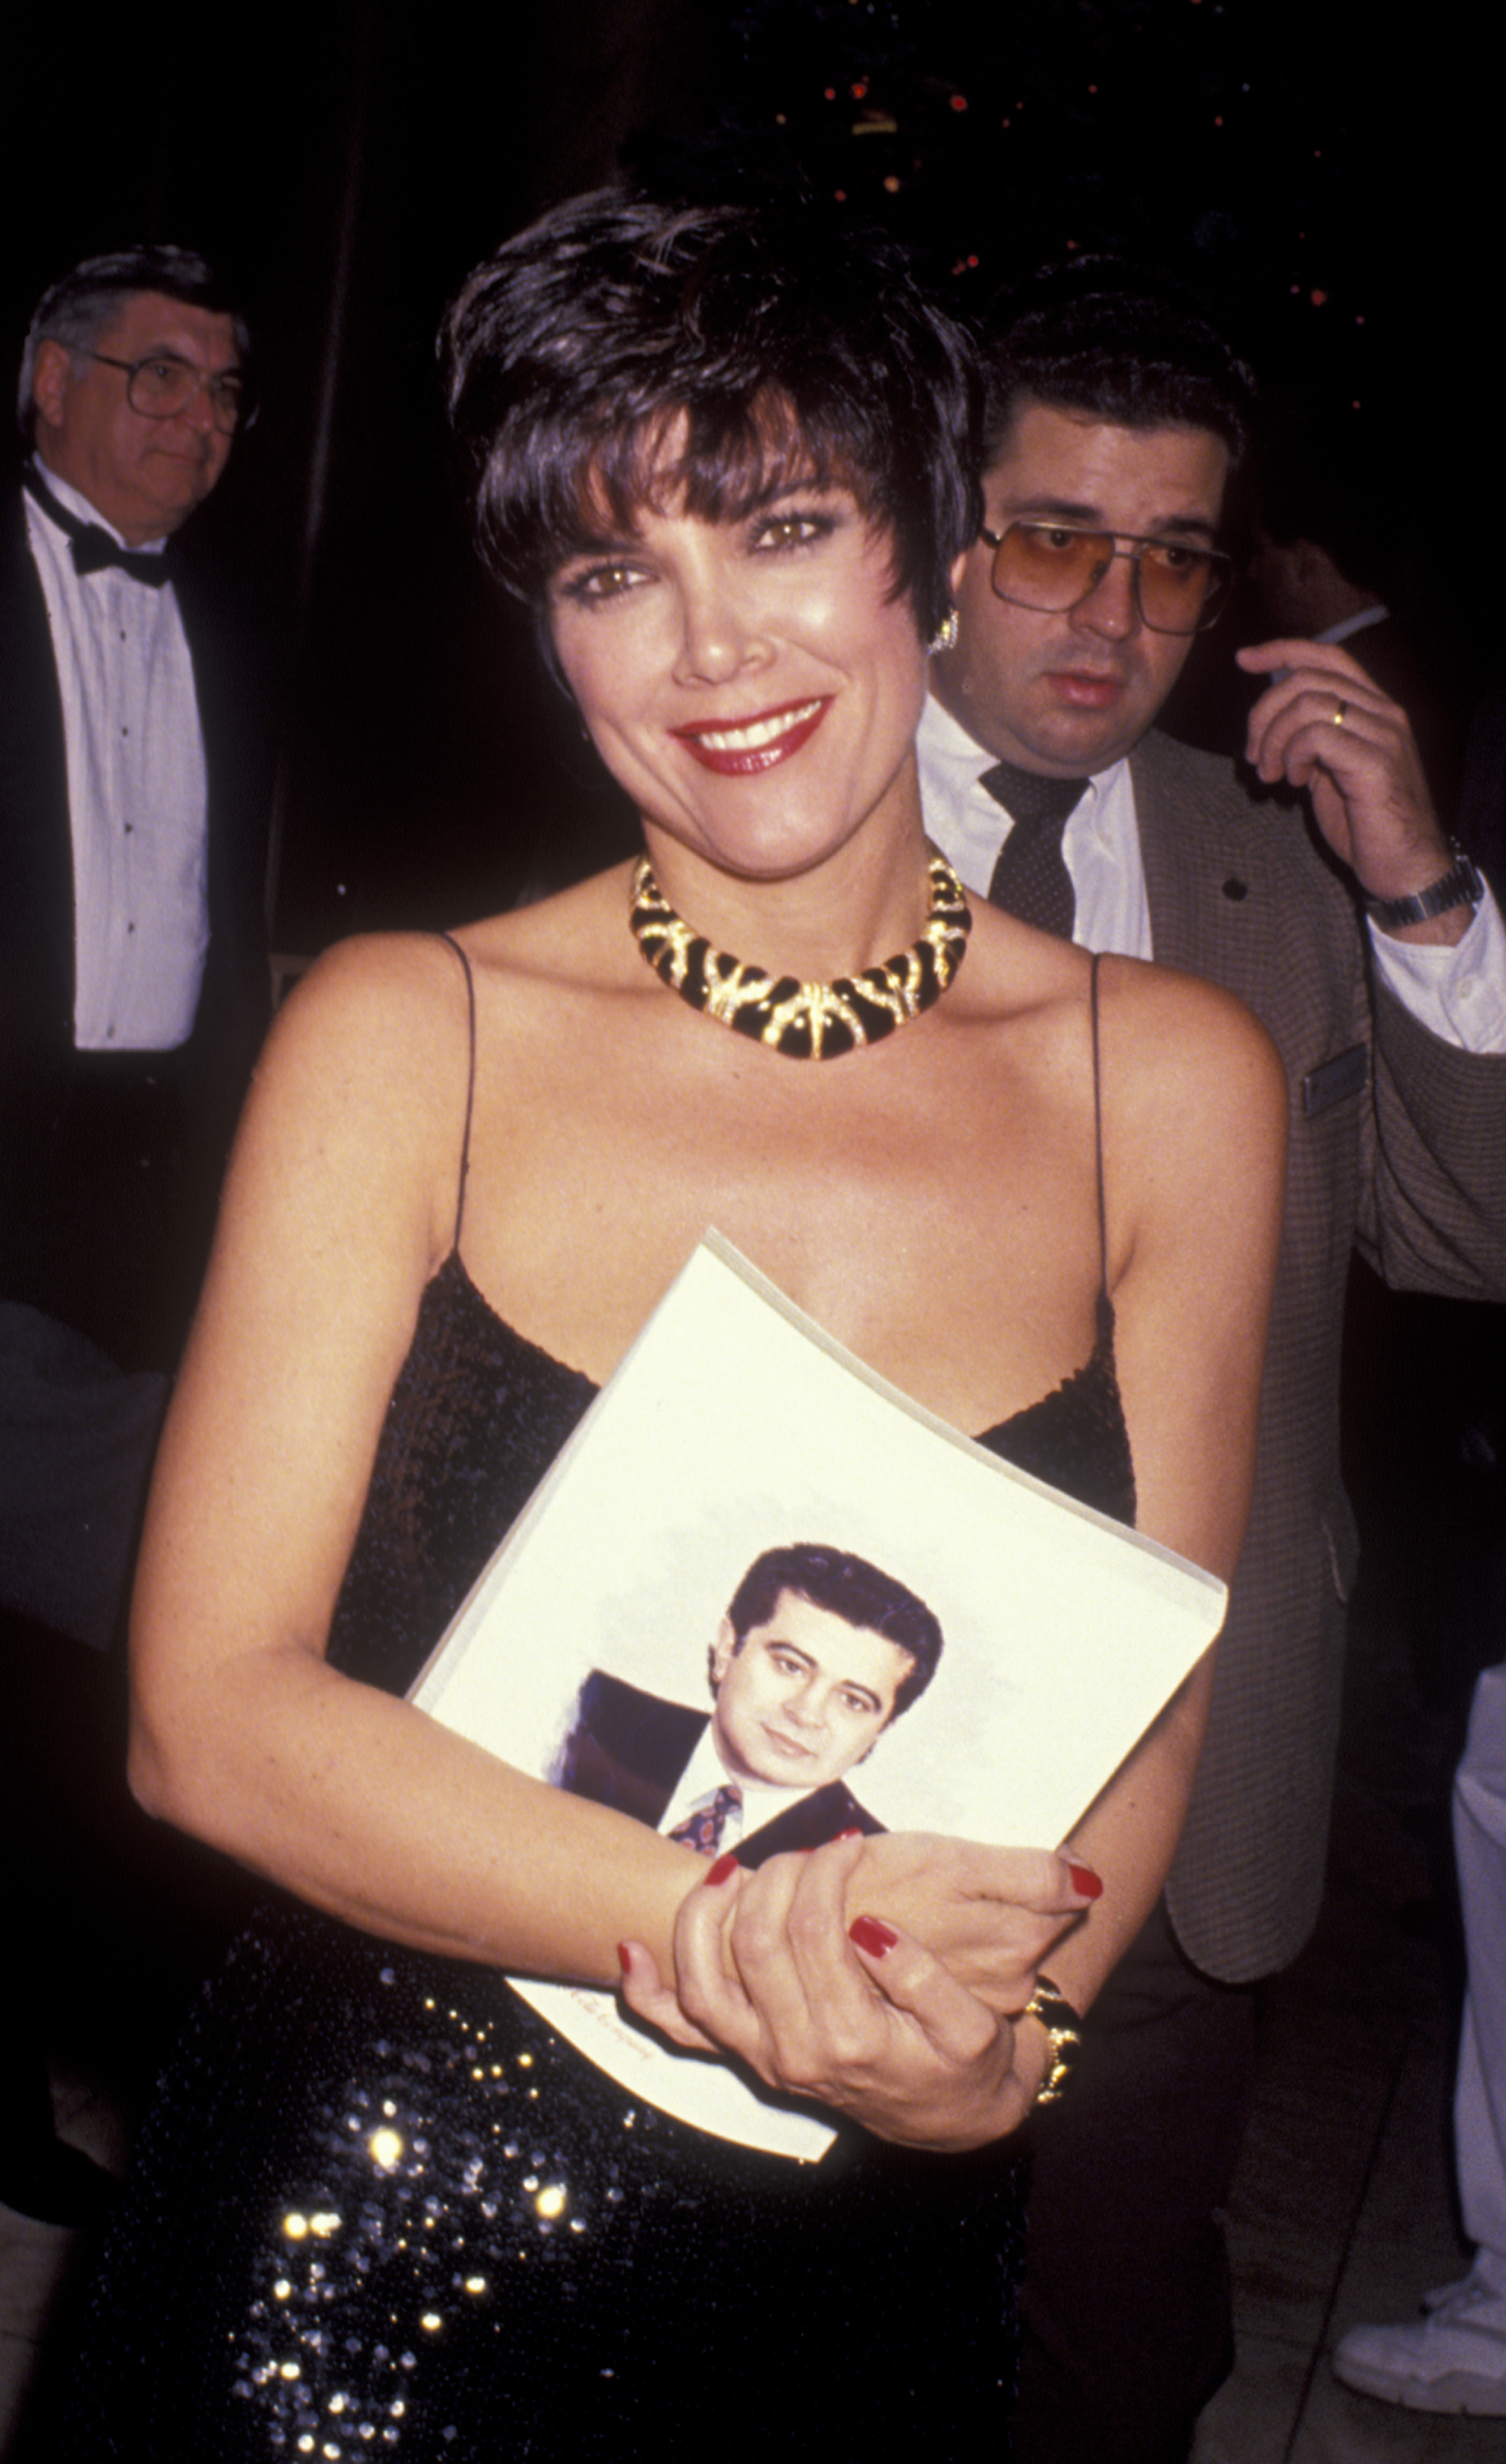 Kris Jenner attends the Pioneer Awards Semel at the Century Plaza Hotel on December 10, 1990 in Century City, California. | Source: Getty Images